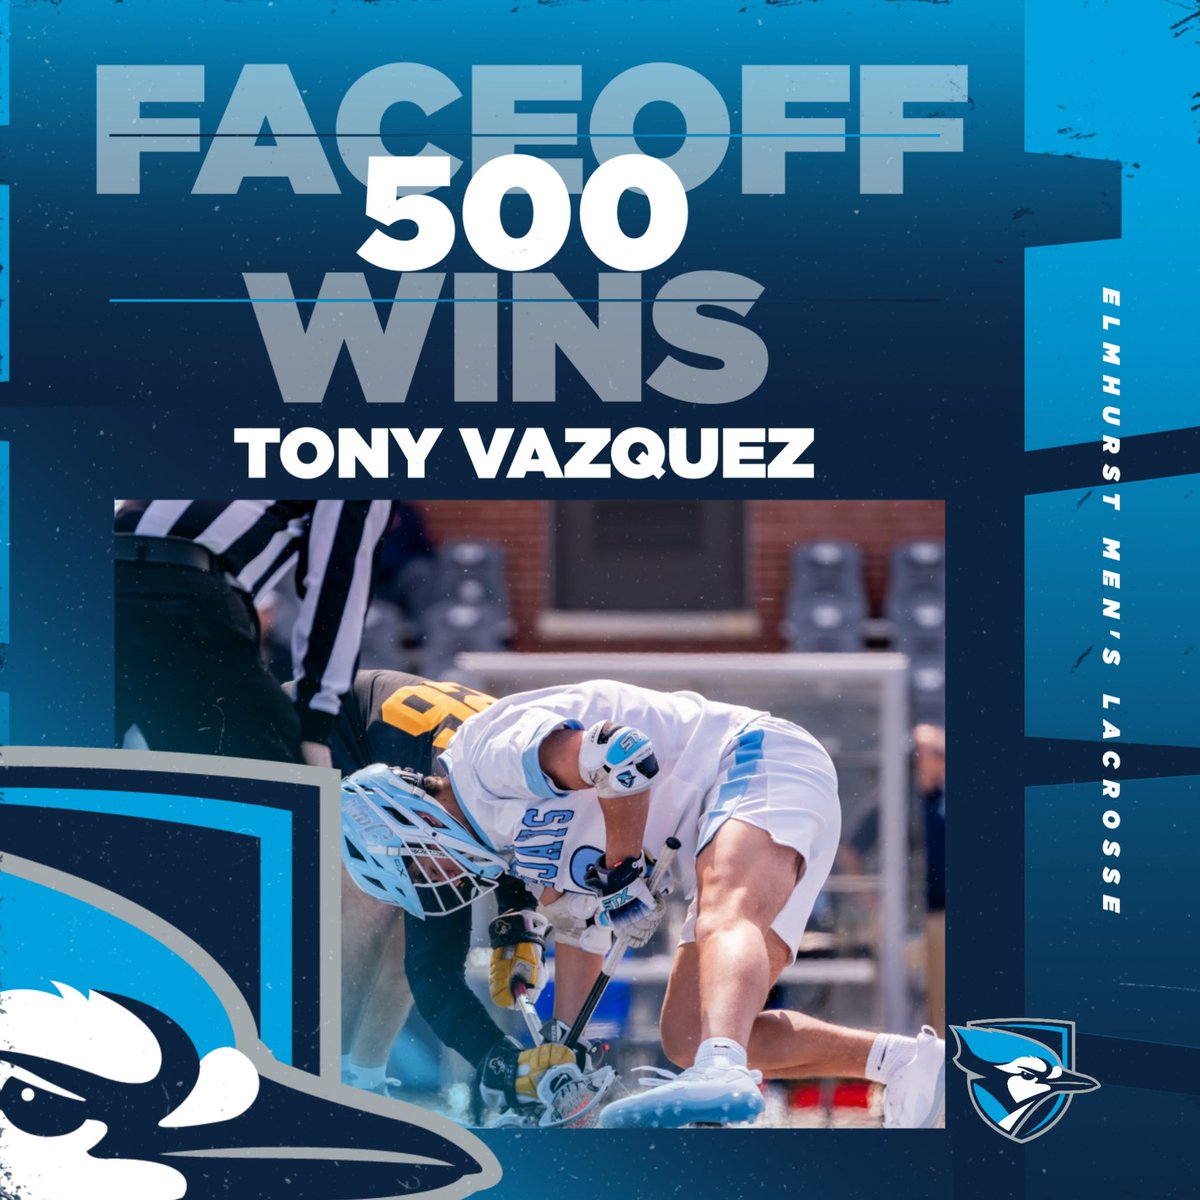 Congratulations Tony Vazquez, for breaking the single season ground ball record with 161. Surpassing Carter Meyer’s 151. Tony has also reached 500 career face-off wins! #BeDangerous